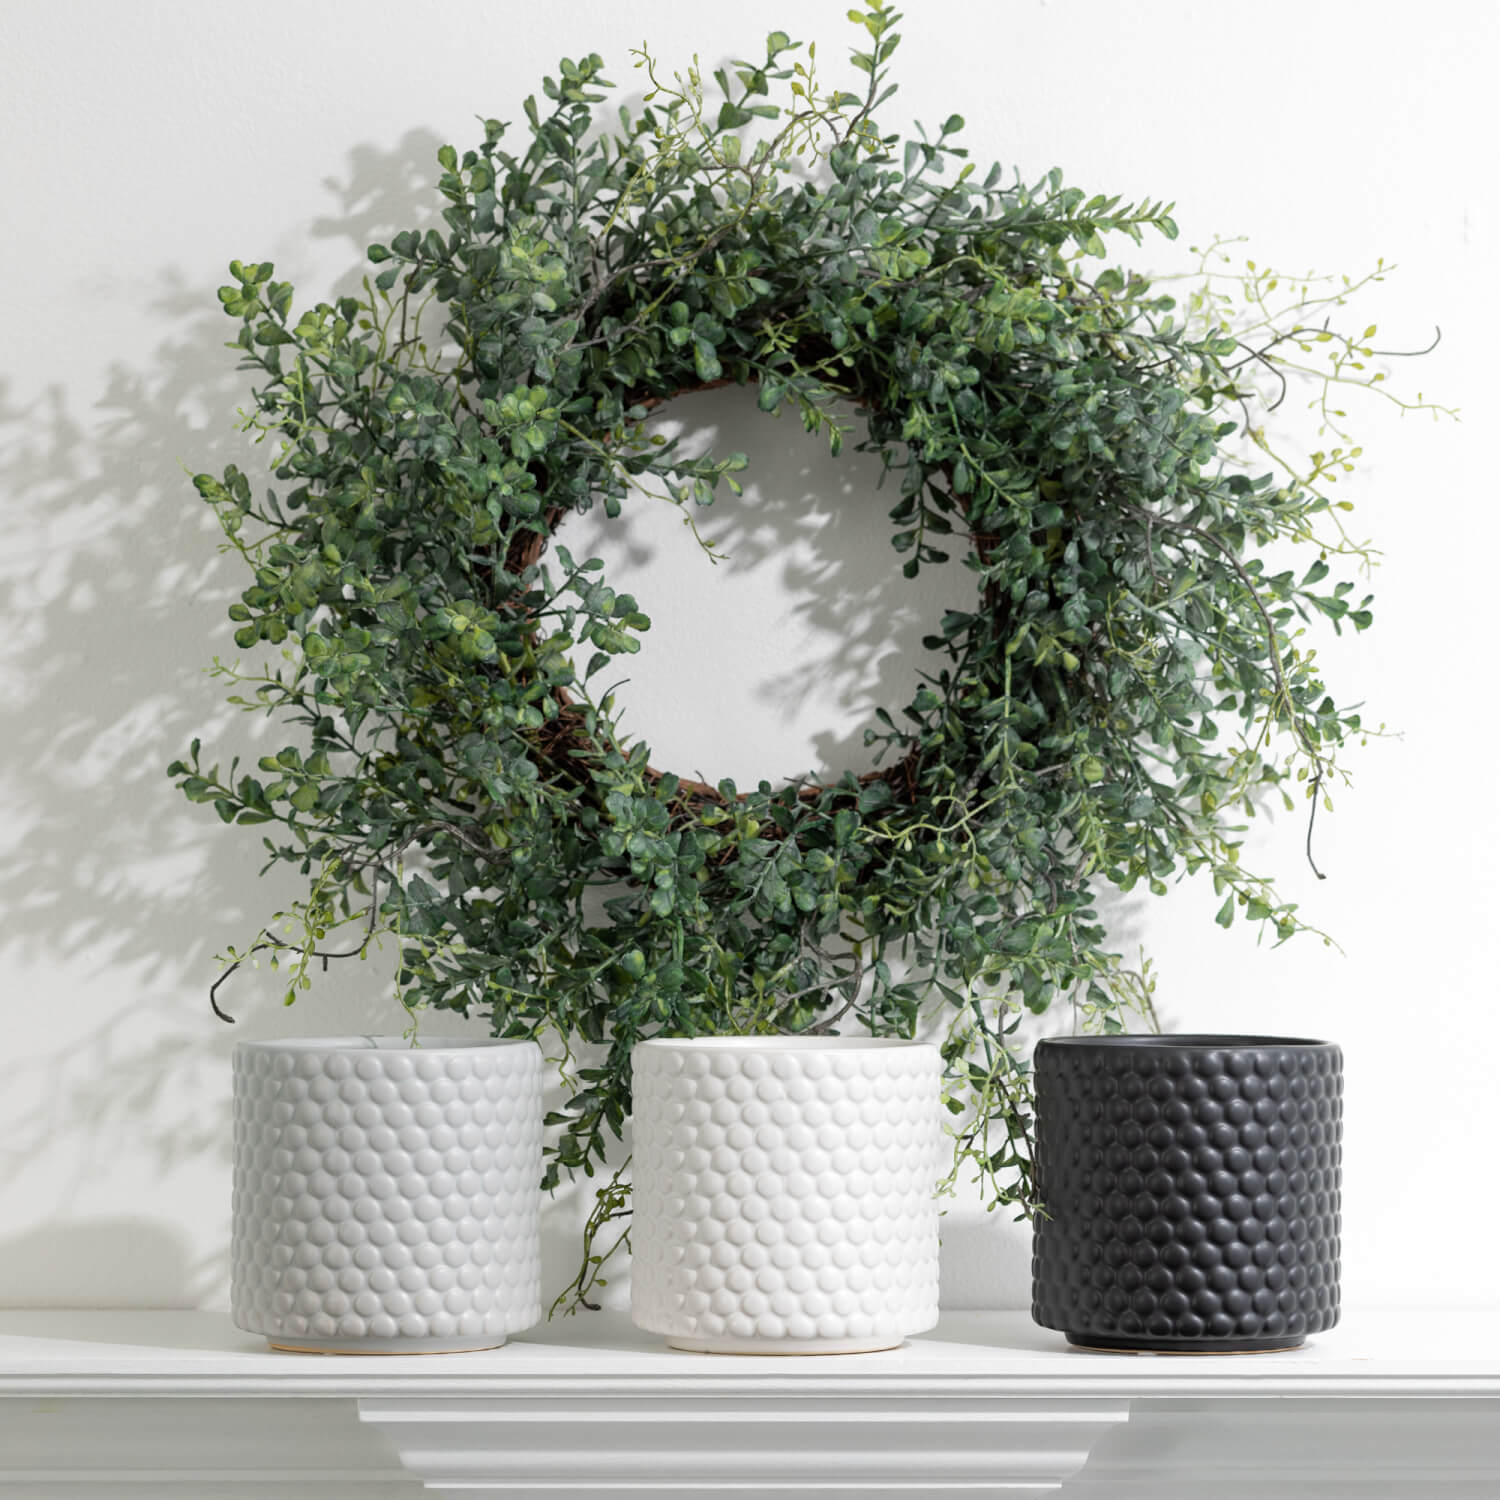 Shop Greenery Wreaths - Add Natural Beauty to Your Home | Shop Now